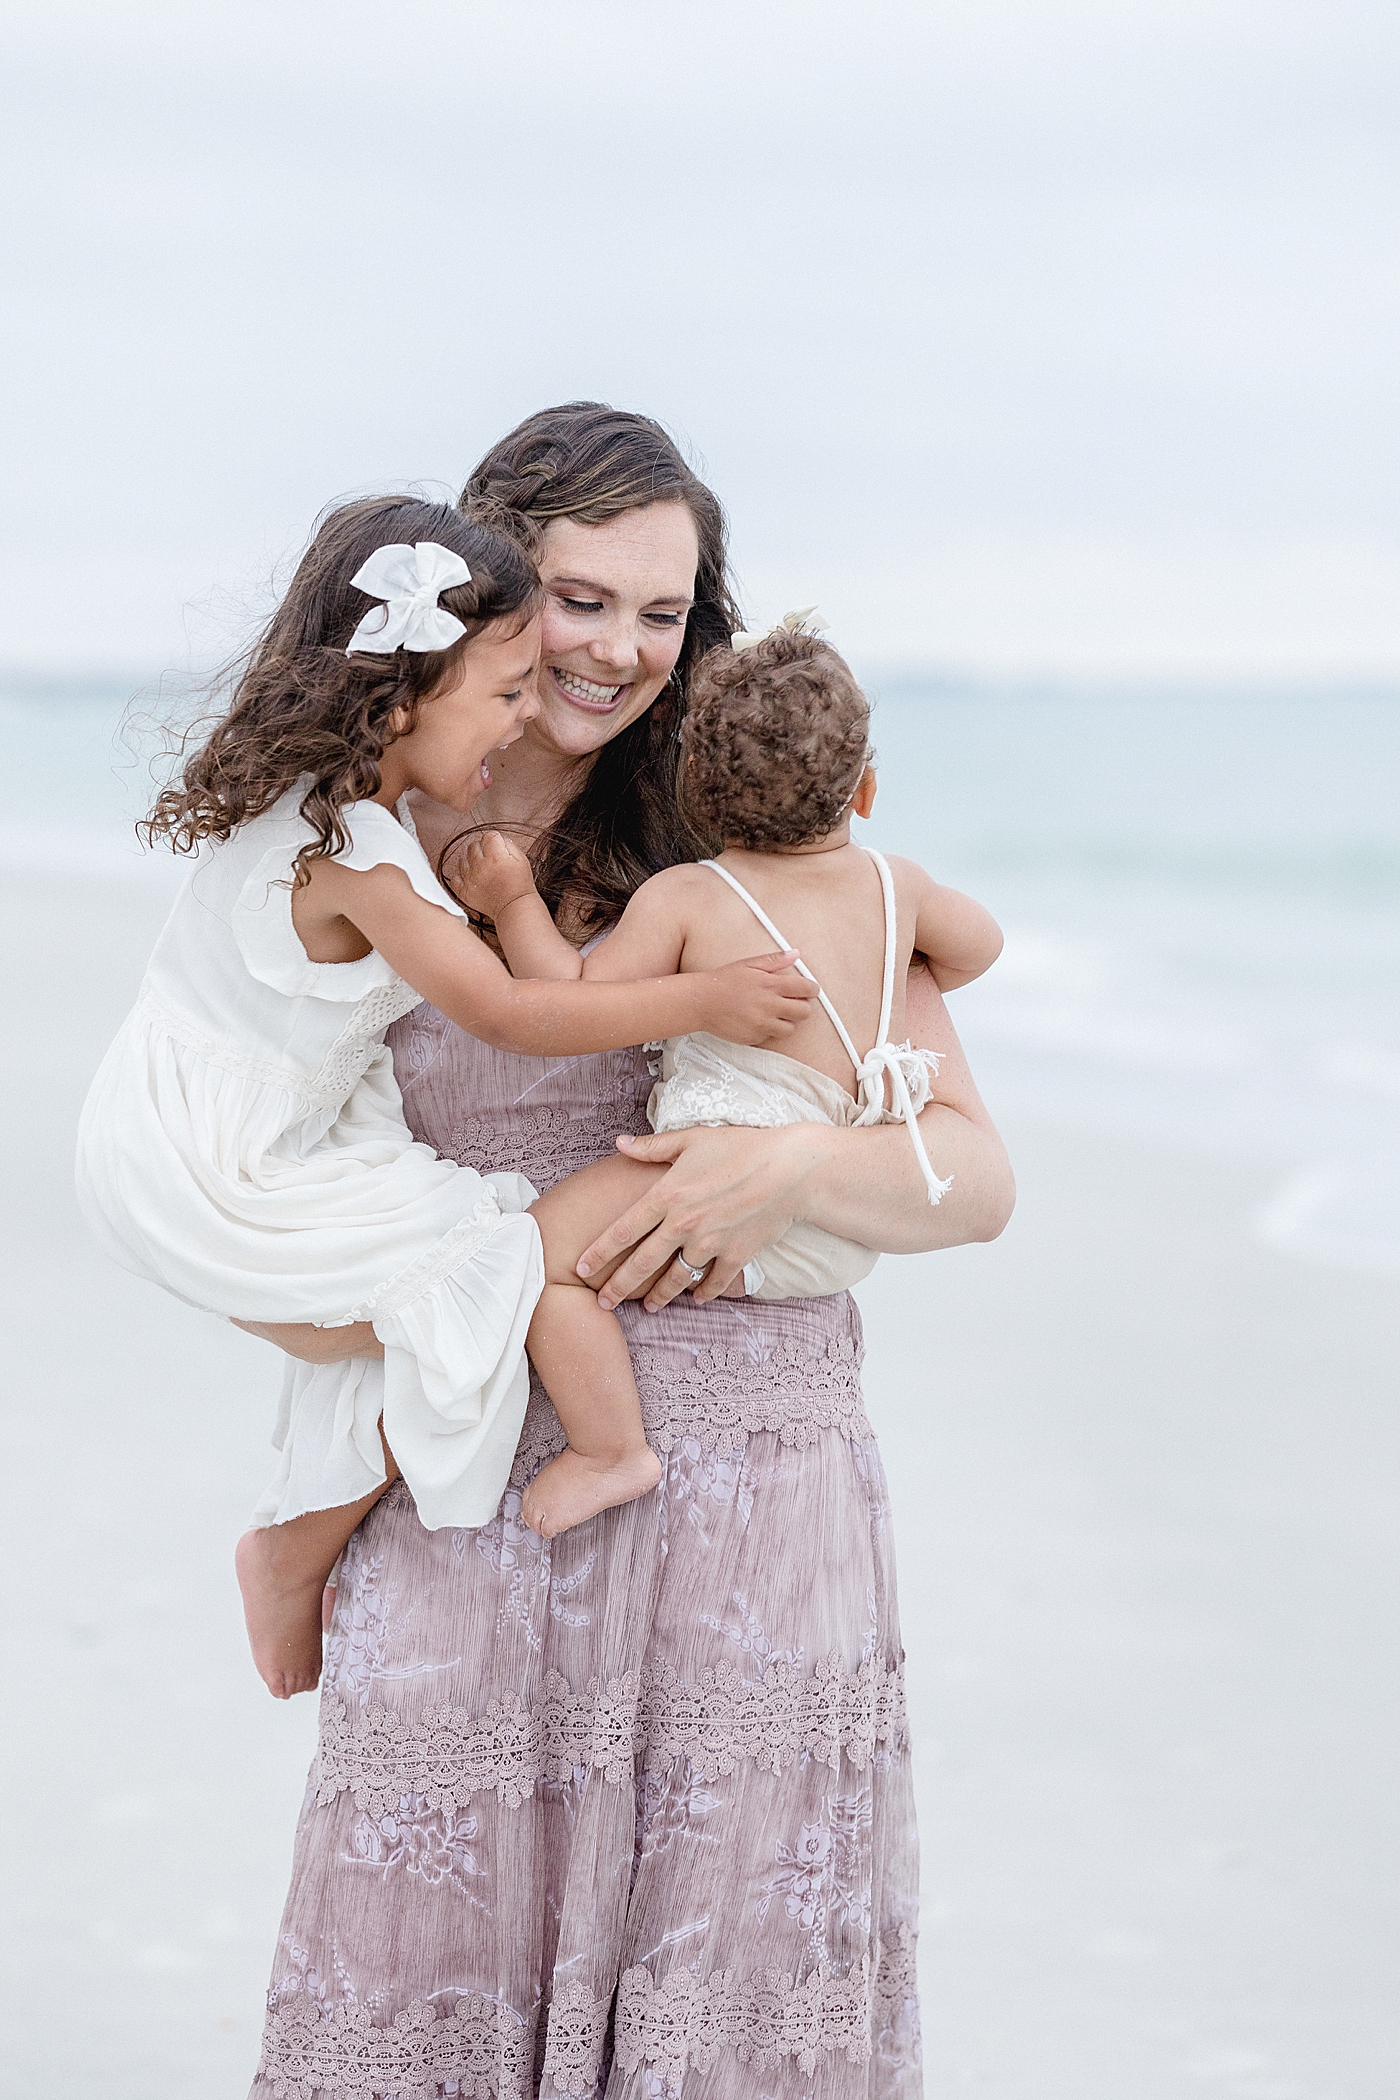 Mom hugging her two girls. Photo by Brittany Elise Photography.